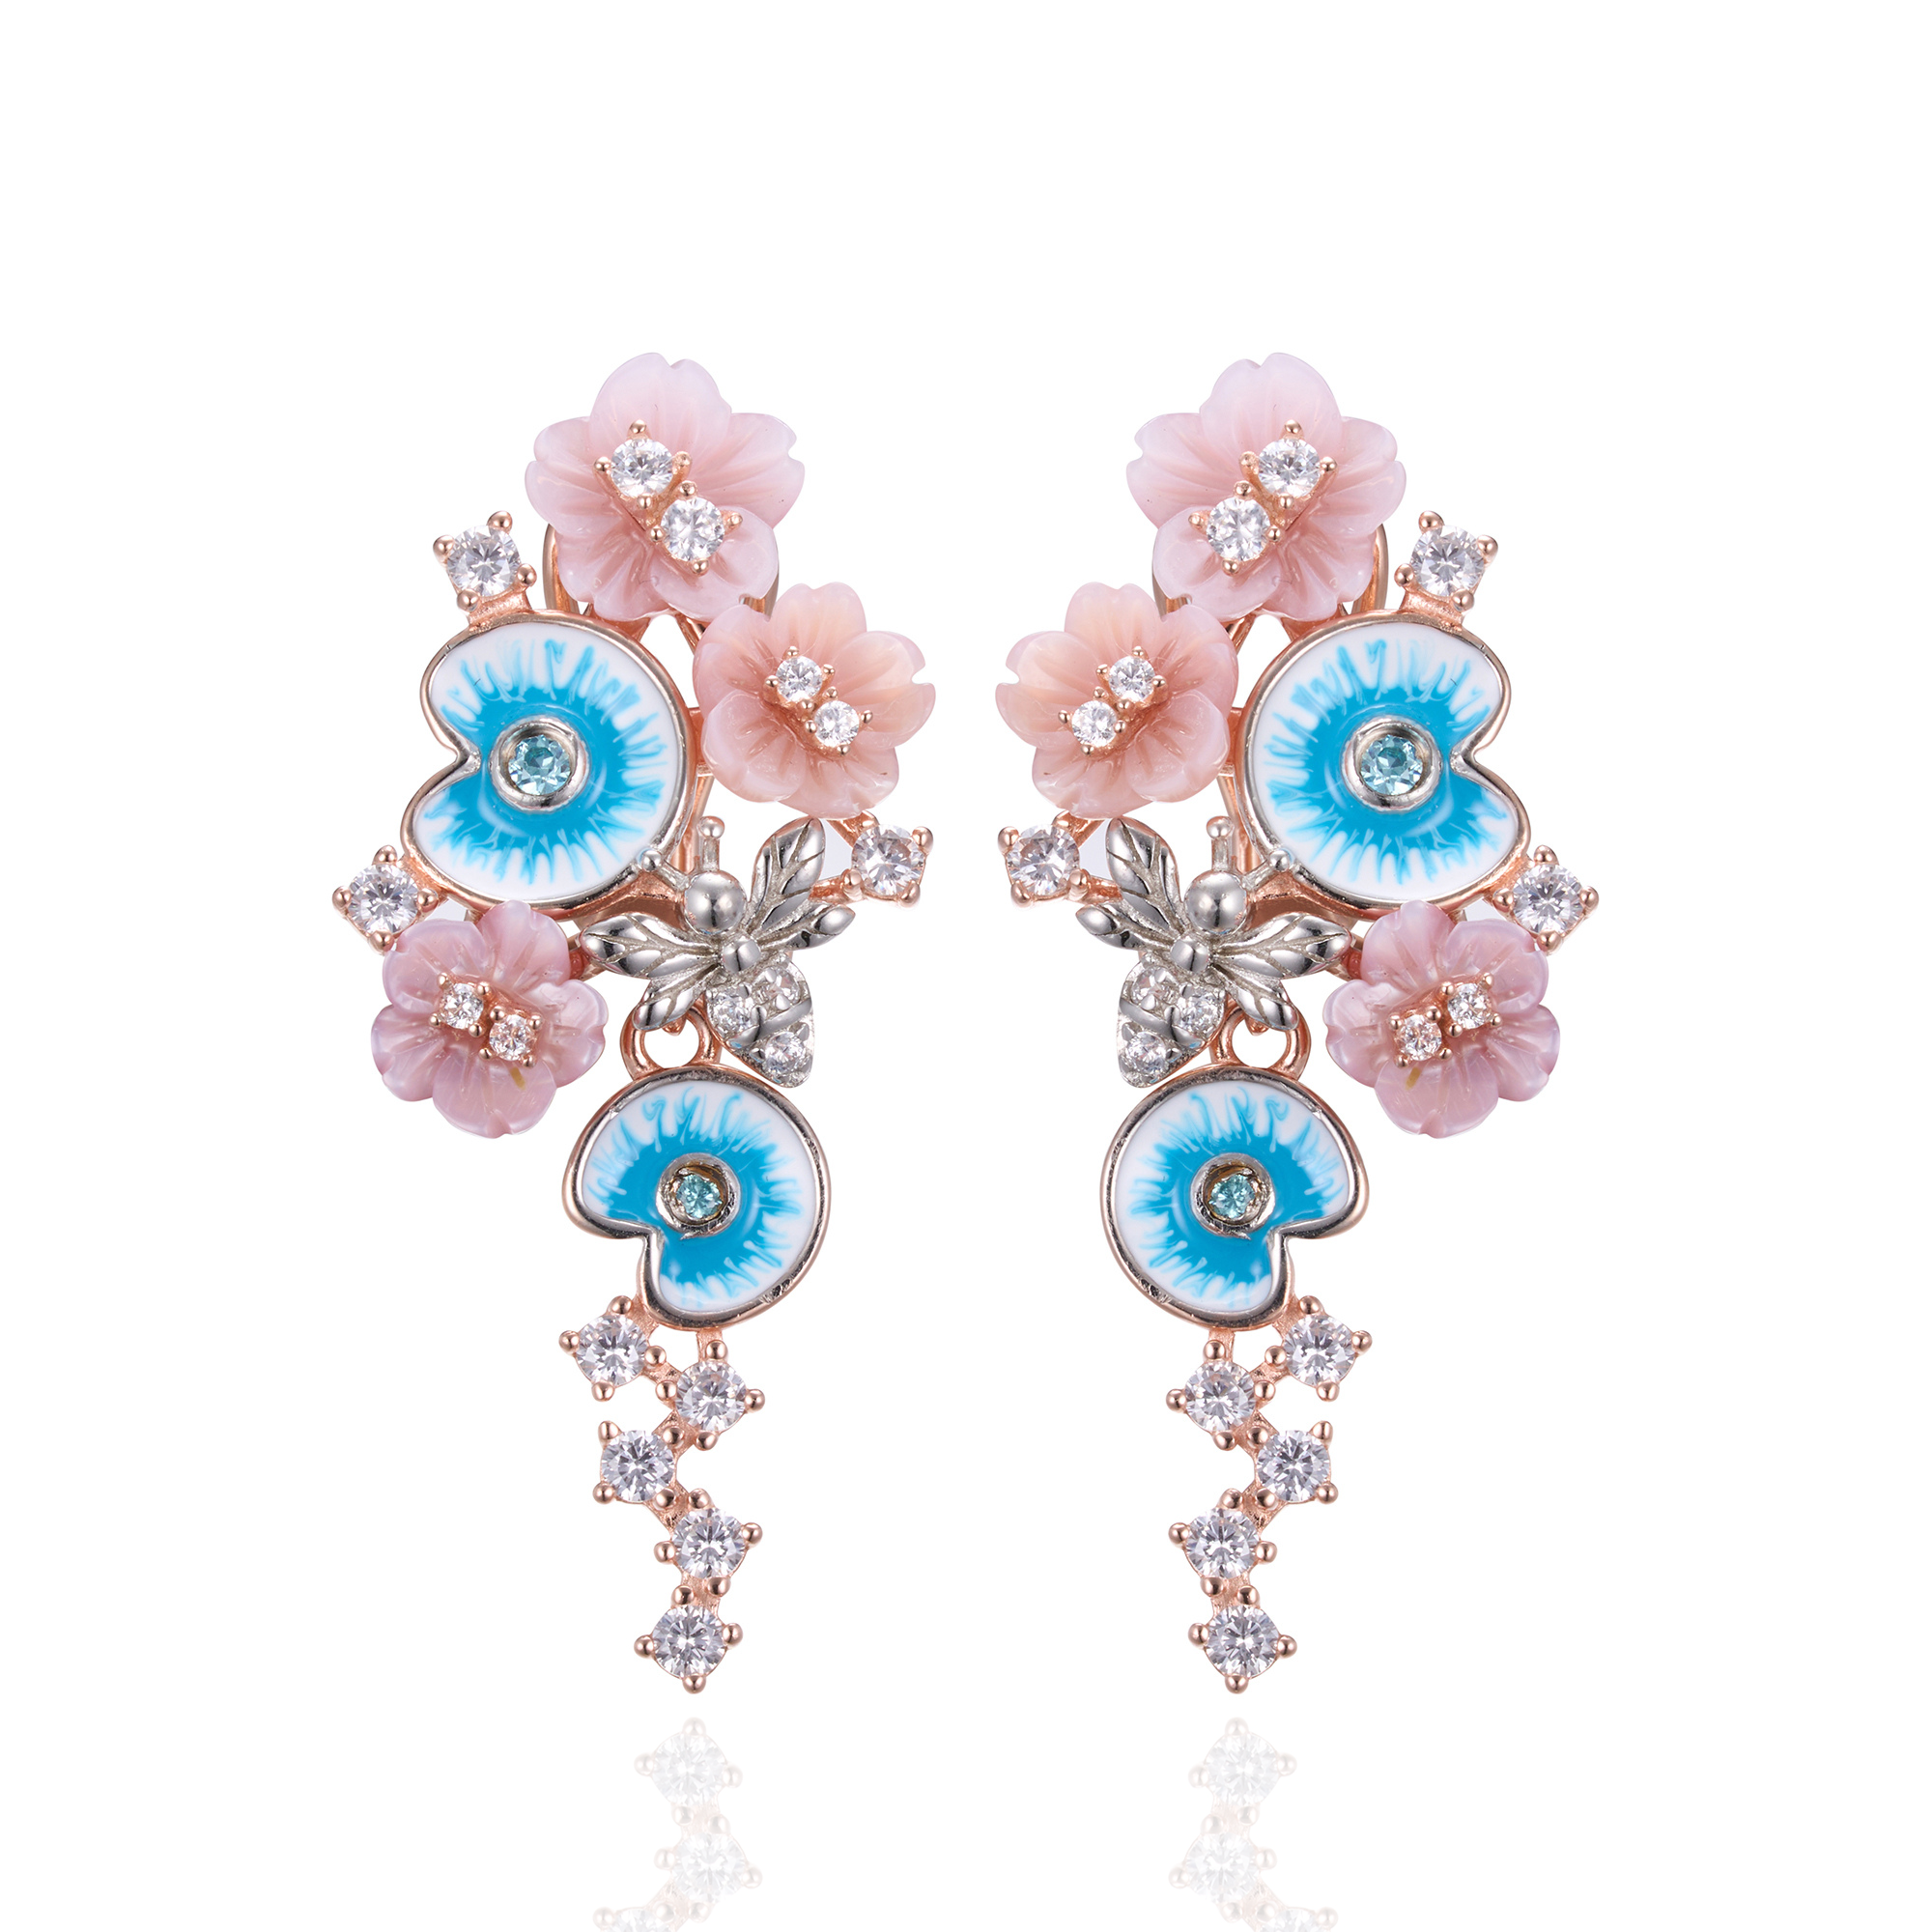 A pair of pink gold plated earrings with pearls, enamel and shell flowers.